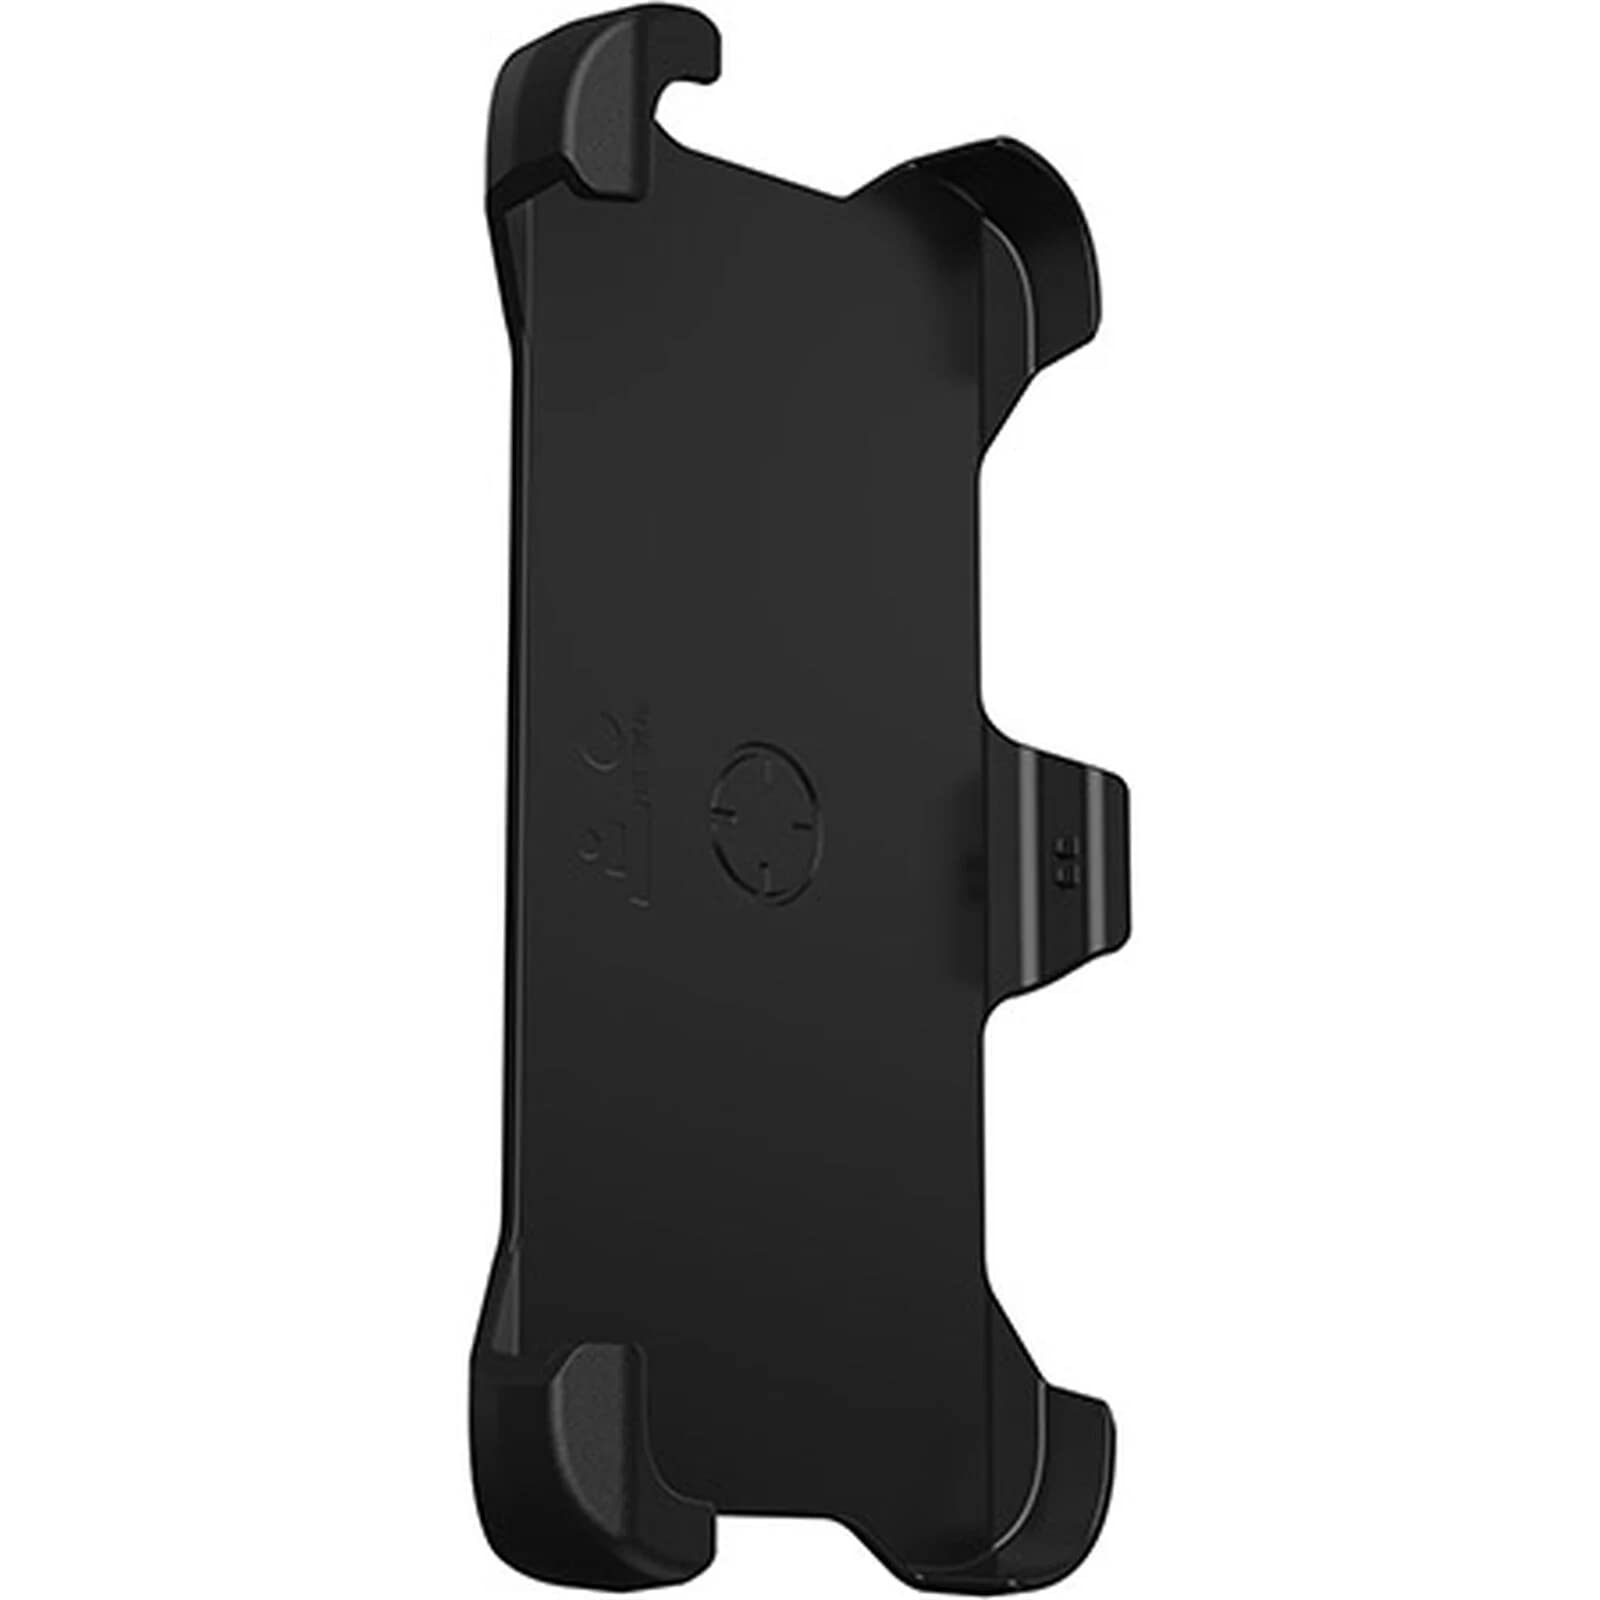 OtterBox Defender Series Holster Belt Clip Replacement for iPhone 11 (Only) - Non-Retail Packaging - Black